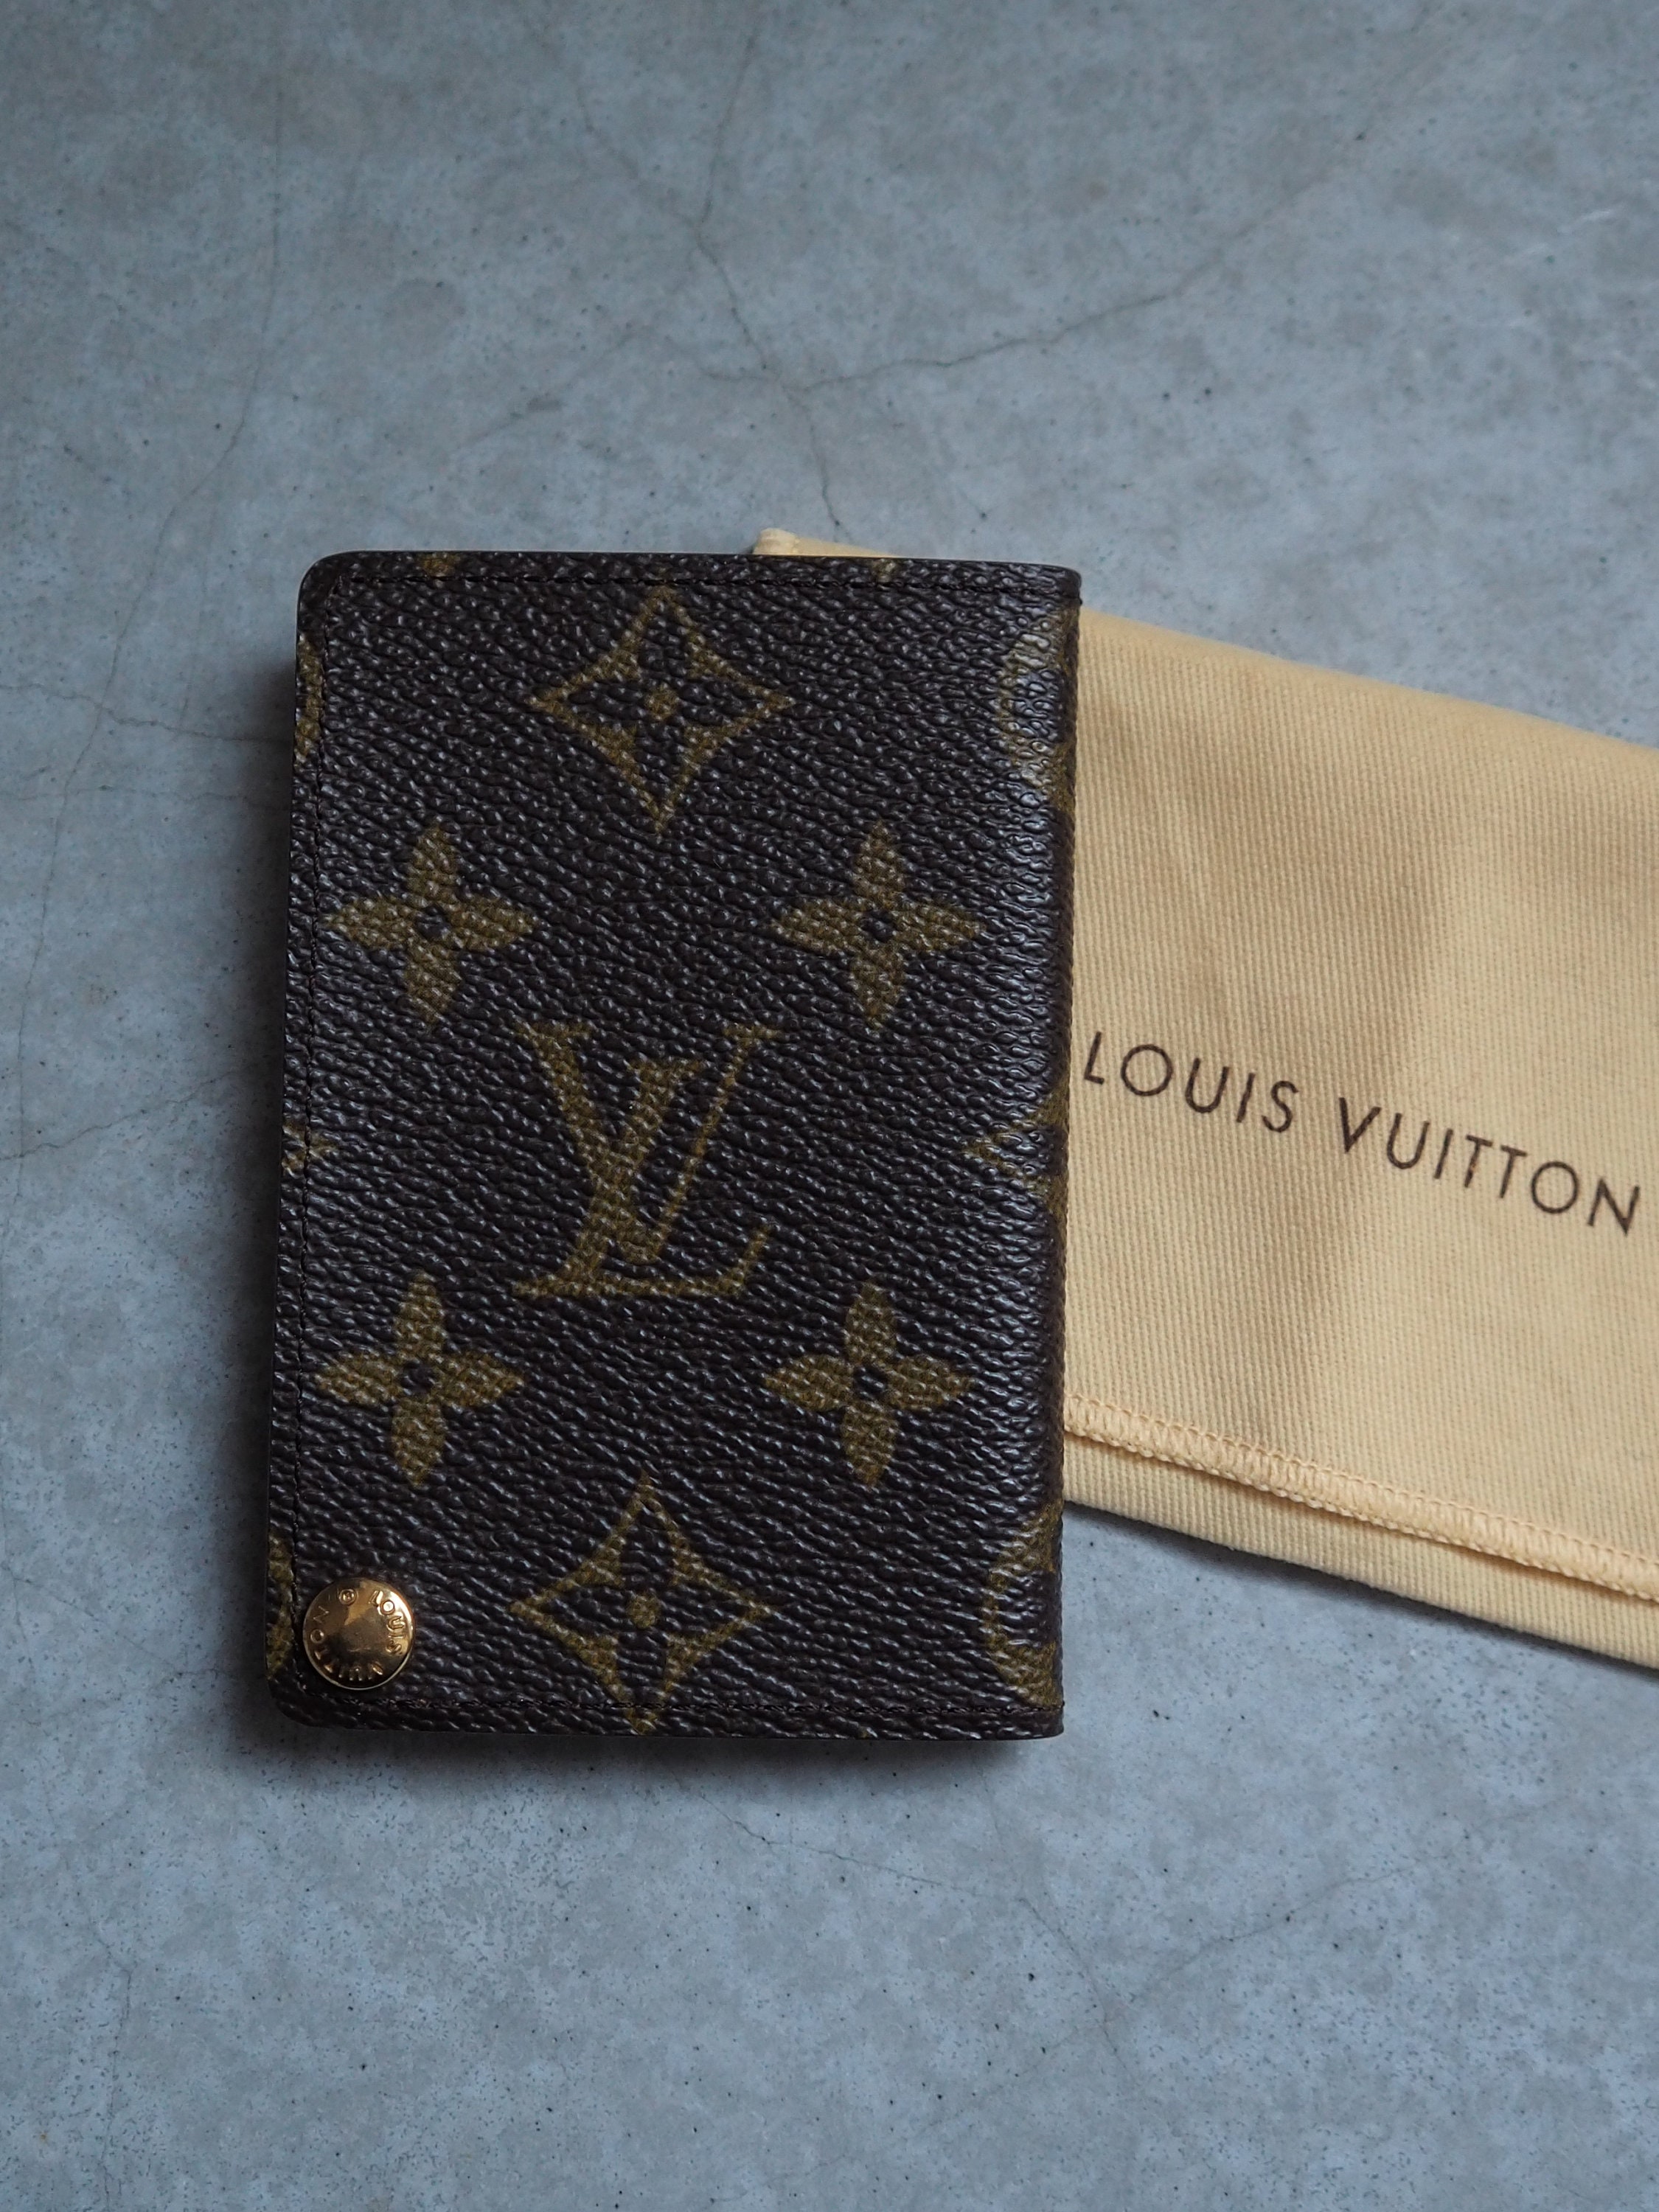 Personalised Passport Cover Louis Vuitton Bagels